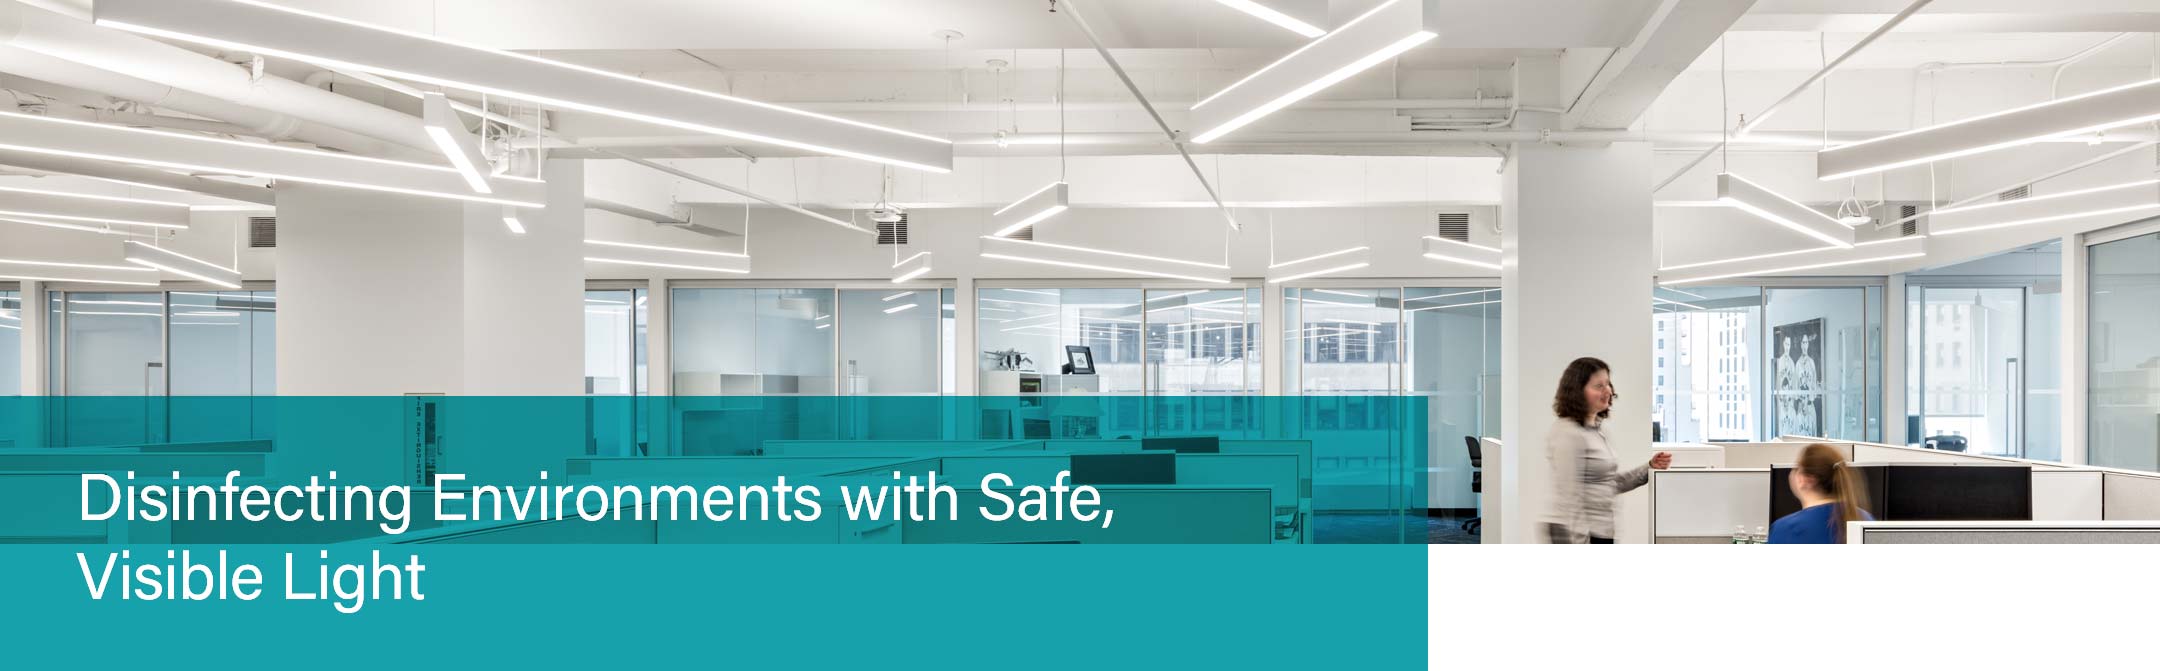 Disinfecting Environments with Safe, Visible Light